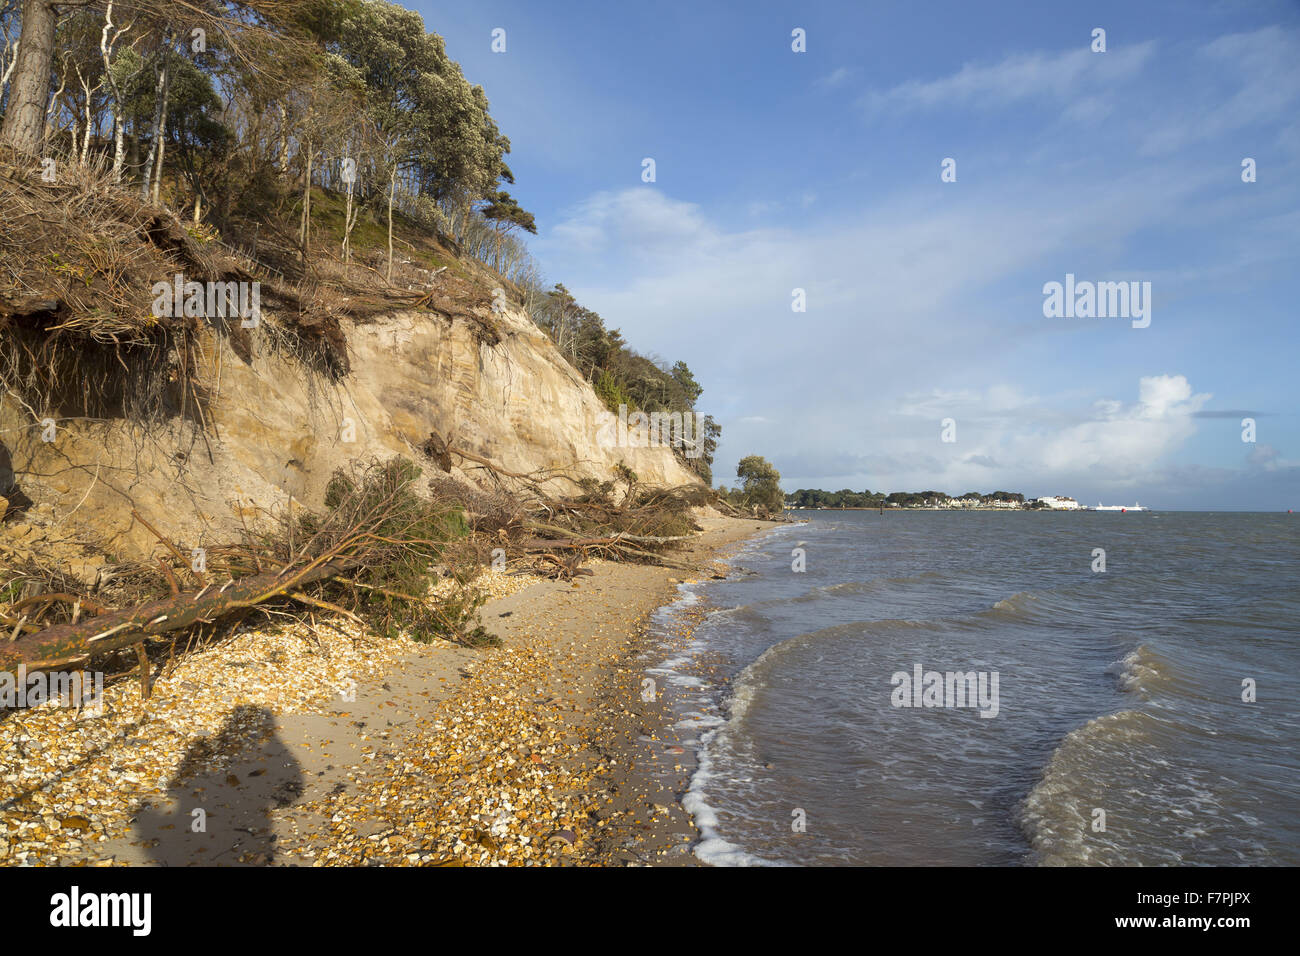 View of the storm-damaged cliffs and beach on the South Shore of Brownsea Island, Dorset, pictured here in February 2014. Extreme weather in January and February of that year resulted in cliff falls and rapid erosion of the coastline. Stock Photo